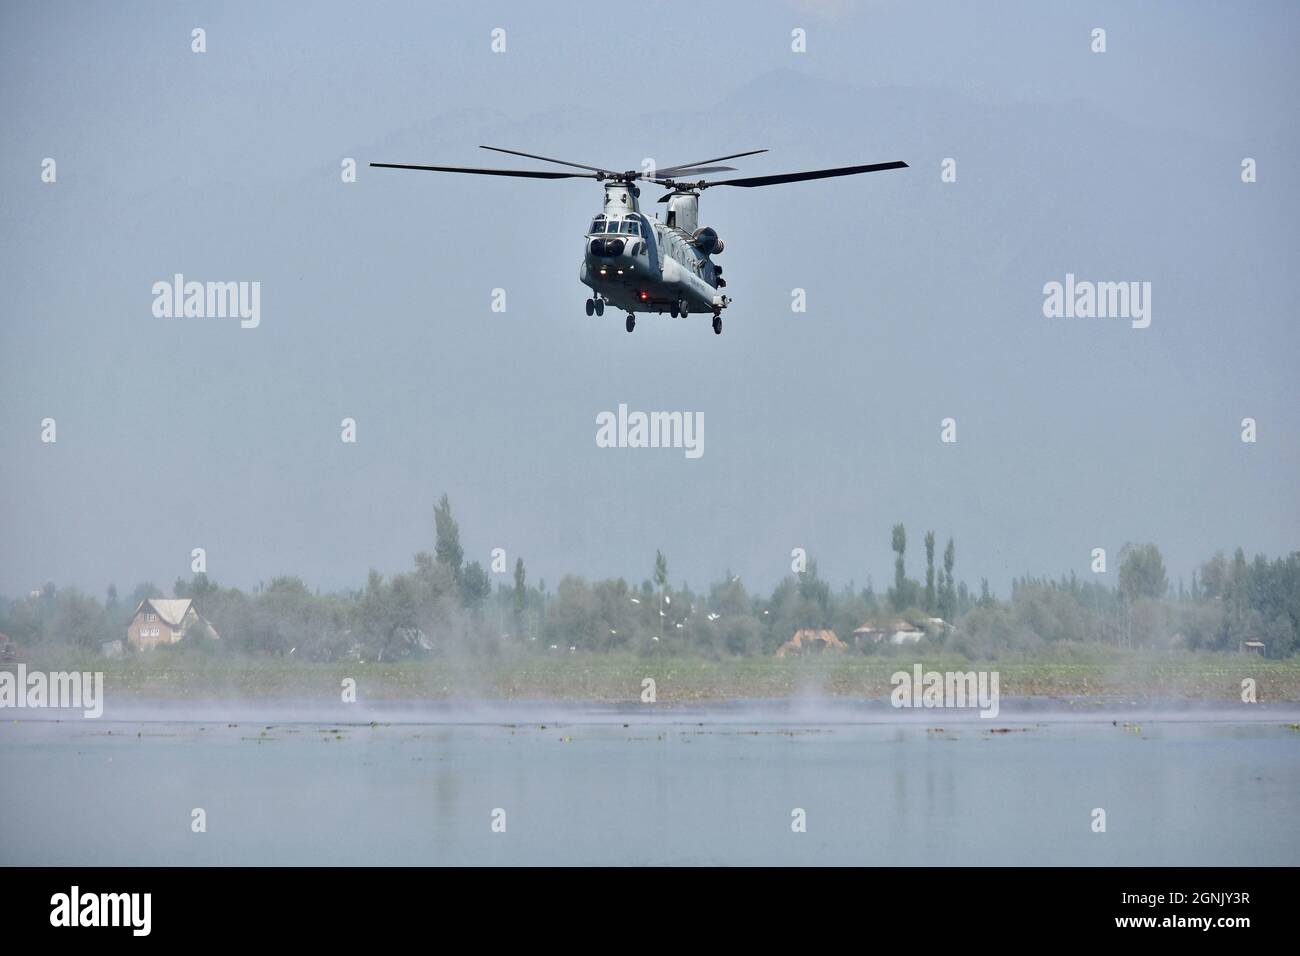 Indian Air Force (IAF) Chinook helicopter flies over the Dal lake during an air show conducted by Indian Air Force (IAF) in Srinagar. After a gap of 13 years, Indian Air Force (IAF) conducted an Air Show over the world famous Dal Lake in Srinagar, an official said.The show saw a display by the IAF’s Surya Kiran Aerobatics Team, Paramotor and powered hang-glider display, fly past MiG-21 Bison, aerobatics by Su-30 Aircraft. It also included Akashganga skydiving display. (Photo by Saqib Majeed / SOPA Images/Sipa USA) Stock Photo